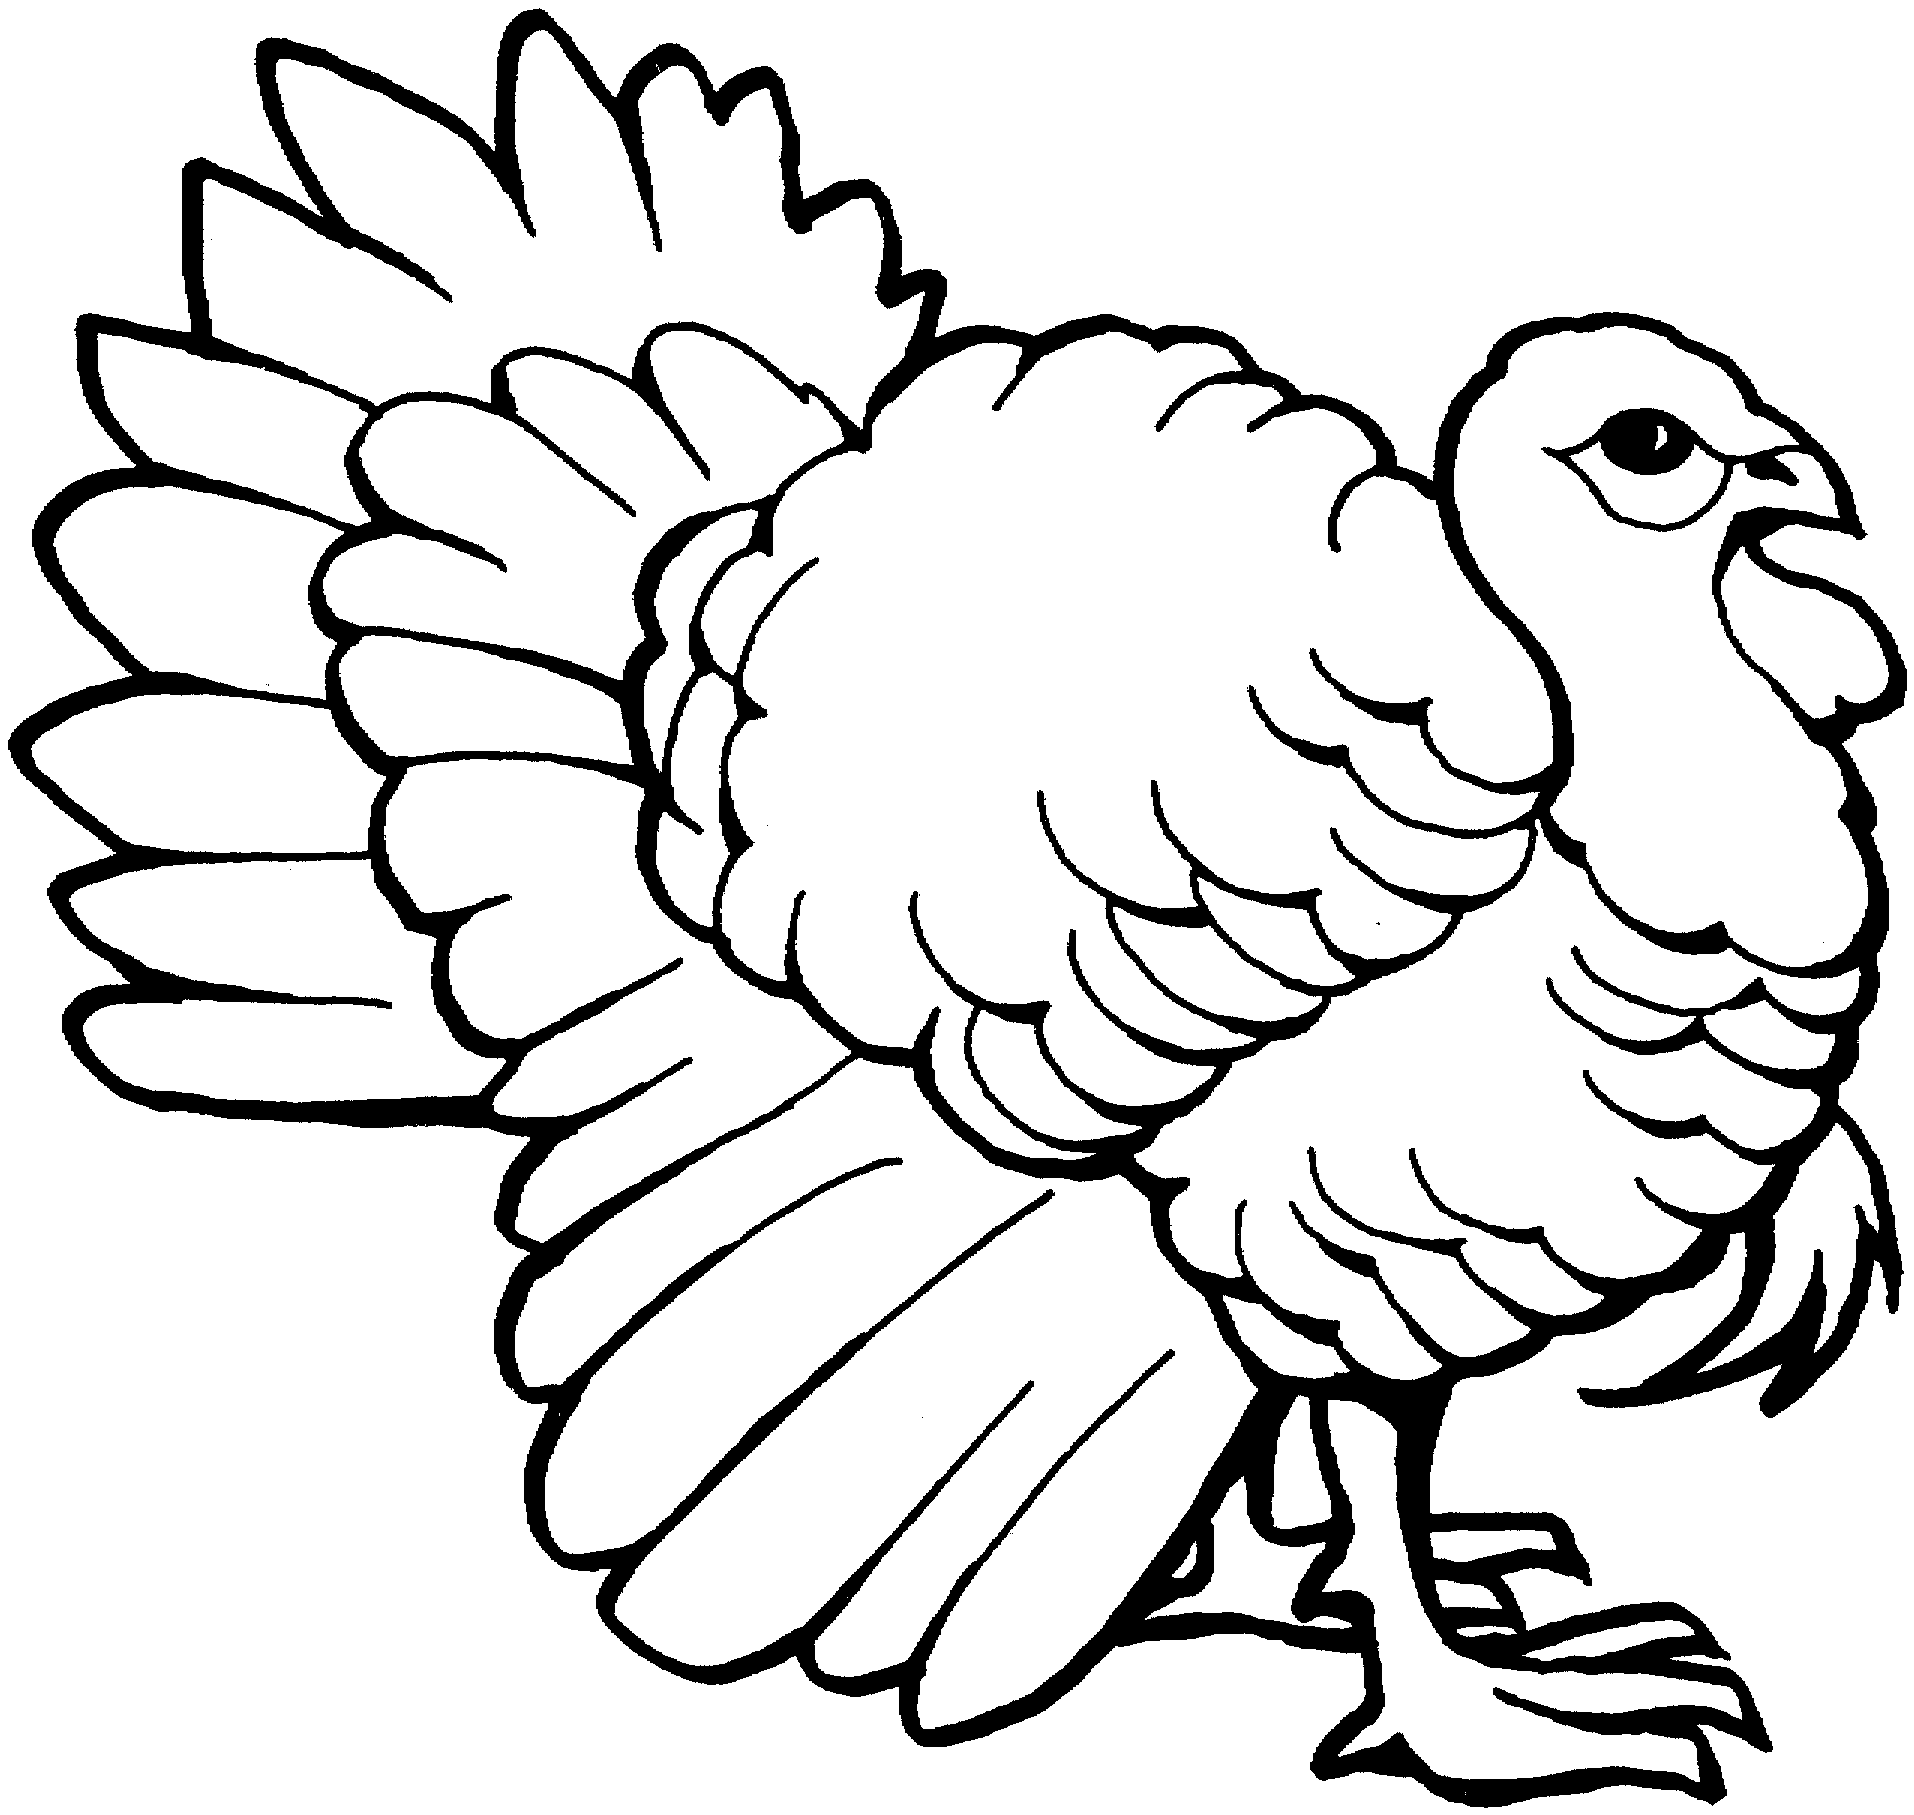 Turkey Head Coloring Page Coloring Pages